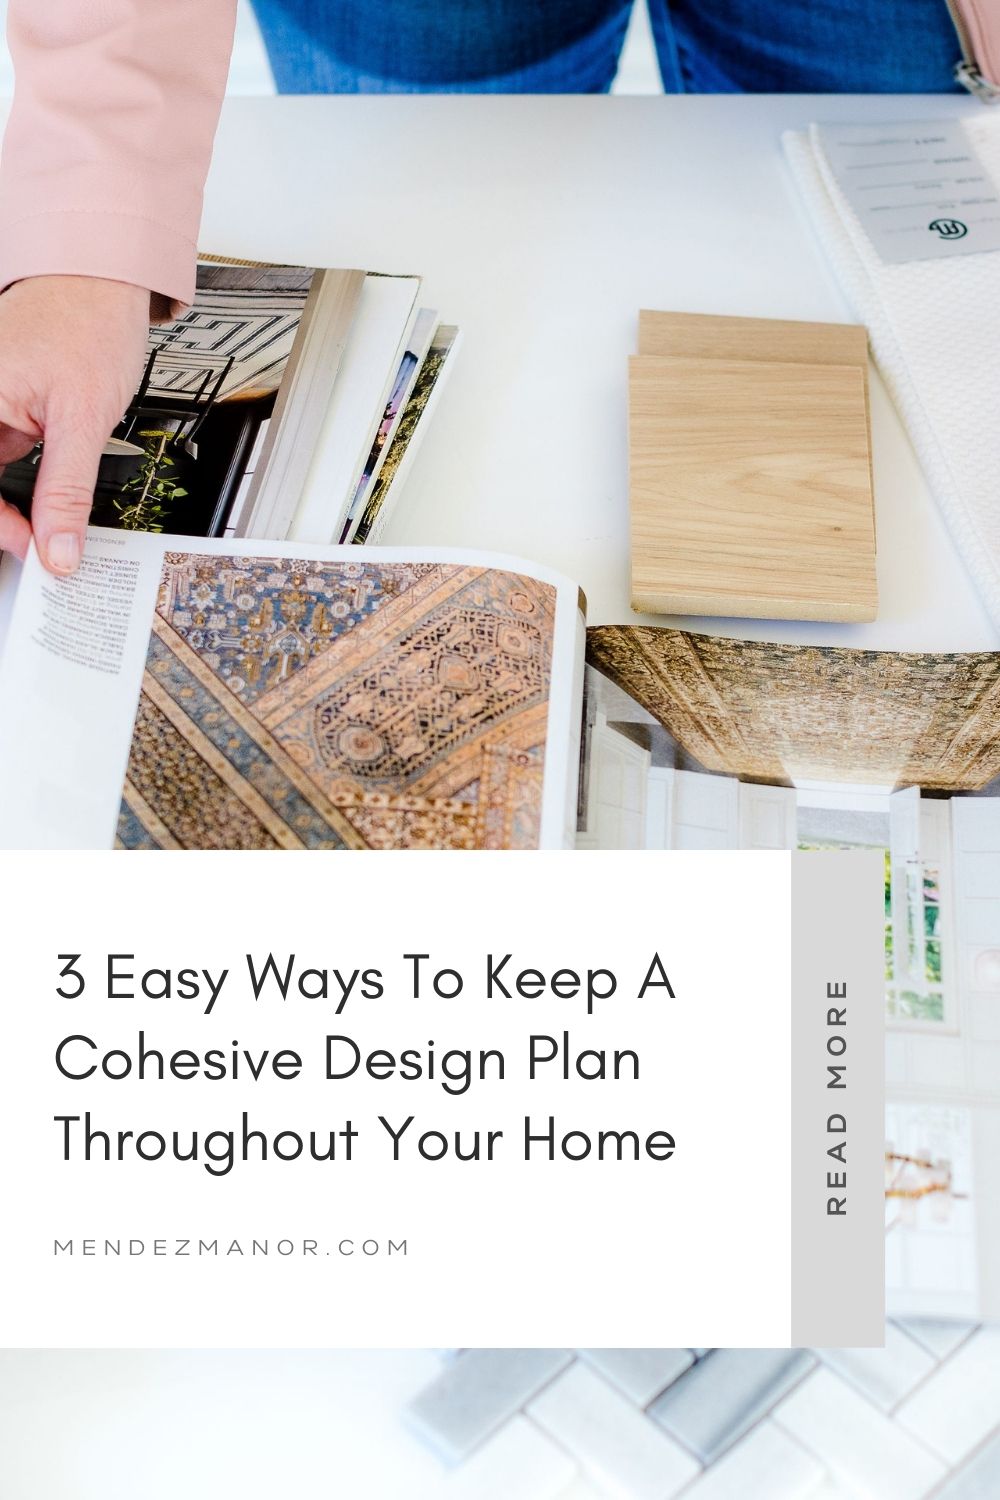 3 Easy Ways To Keep A Cohesive Design Plan Throughout Your Home